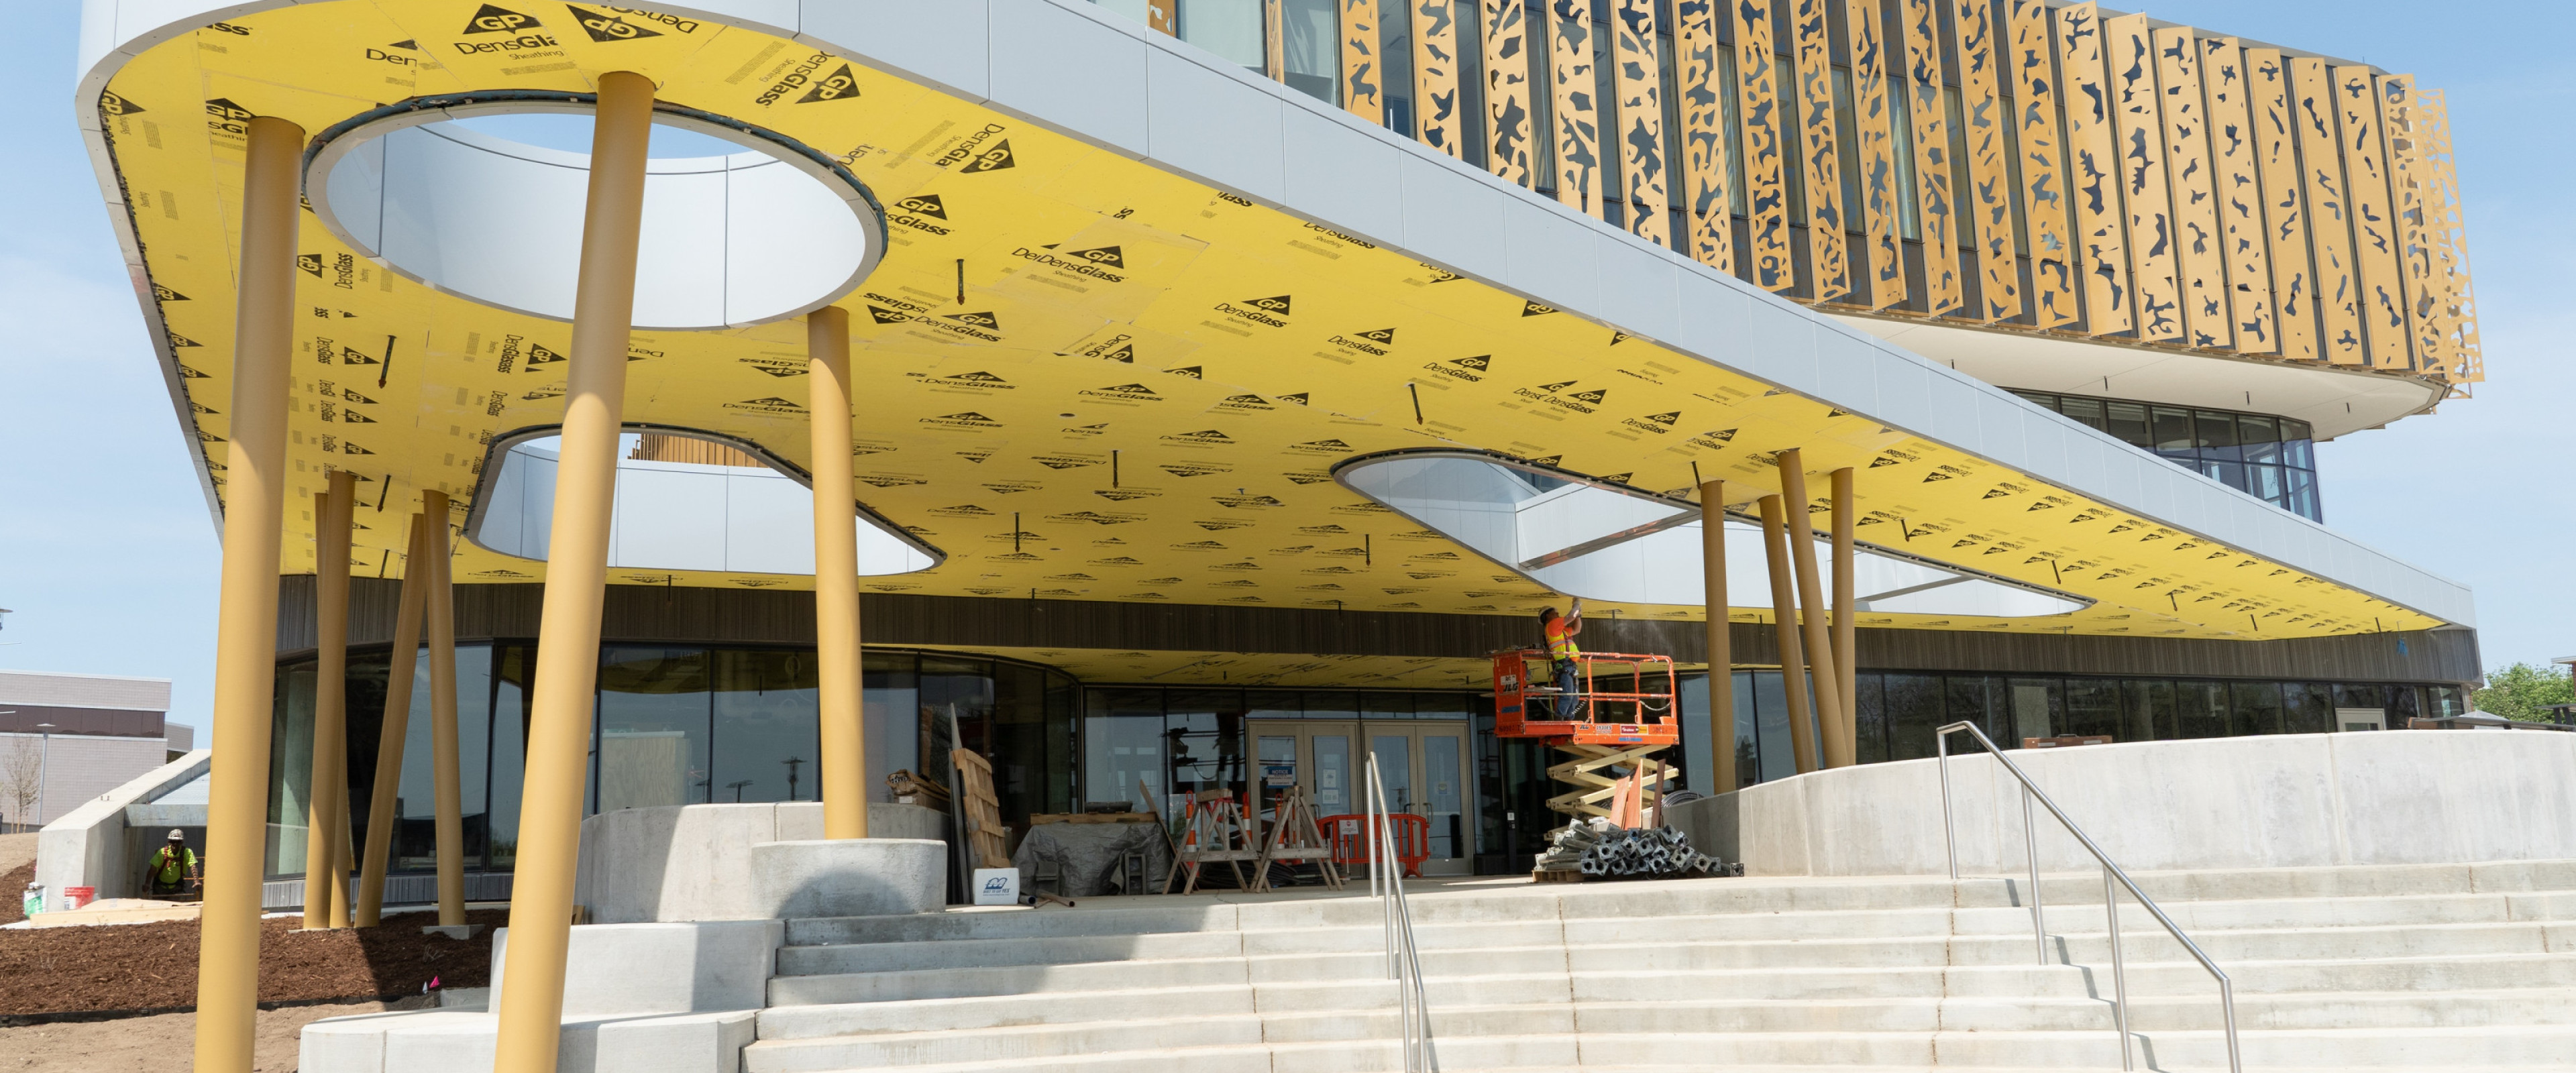 One of the entry points of the new Student Center and Dining Facility can be seen under construction. There is a large stairwell leading up to a platform that has a room with sky lights held up by pillars. In the distance you can see the rest of the building.